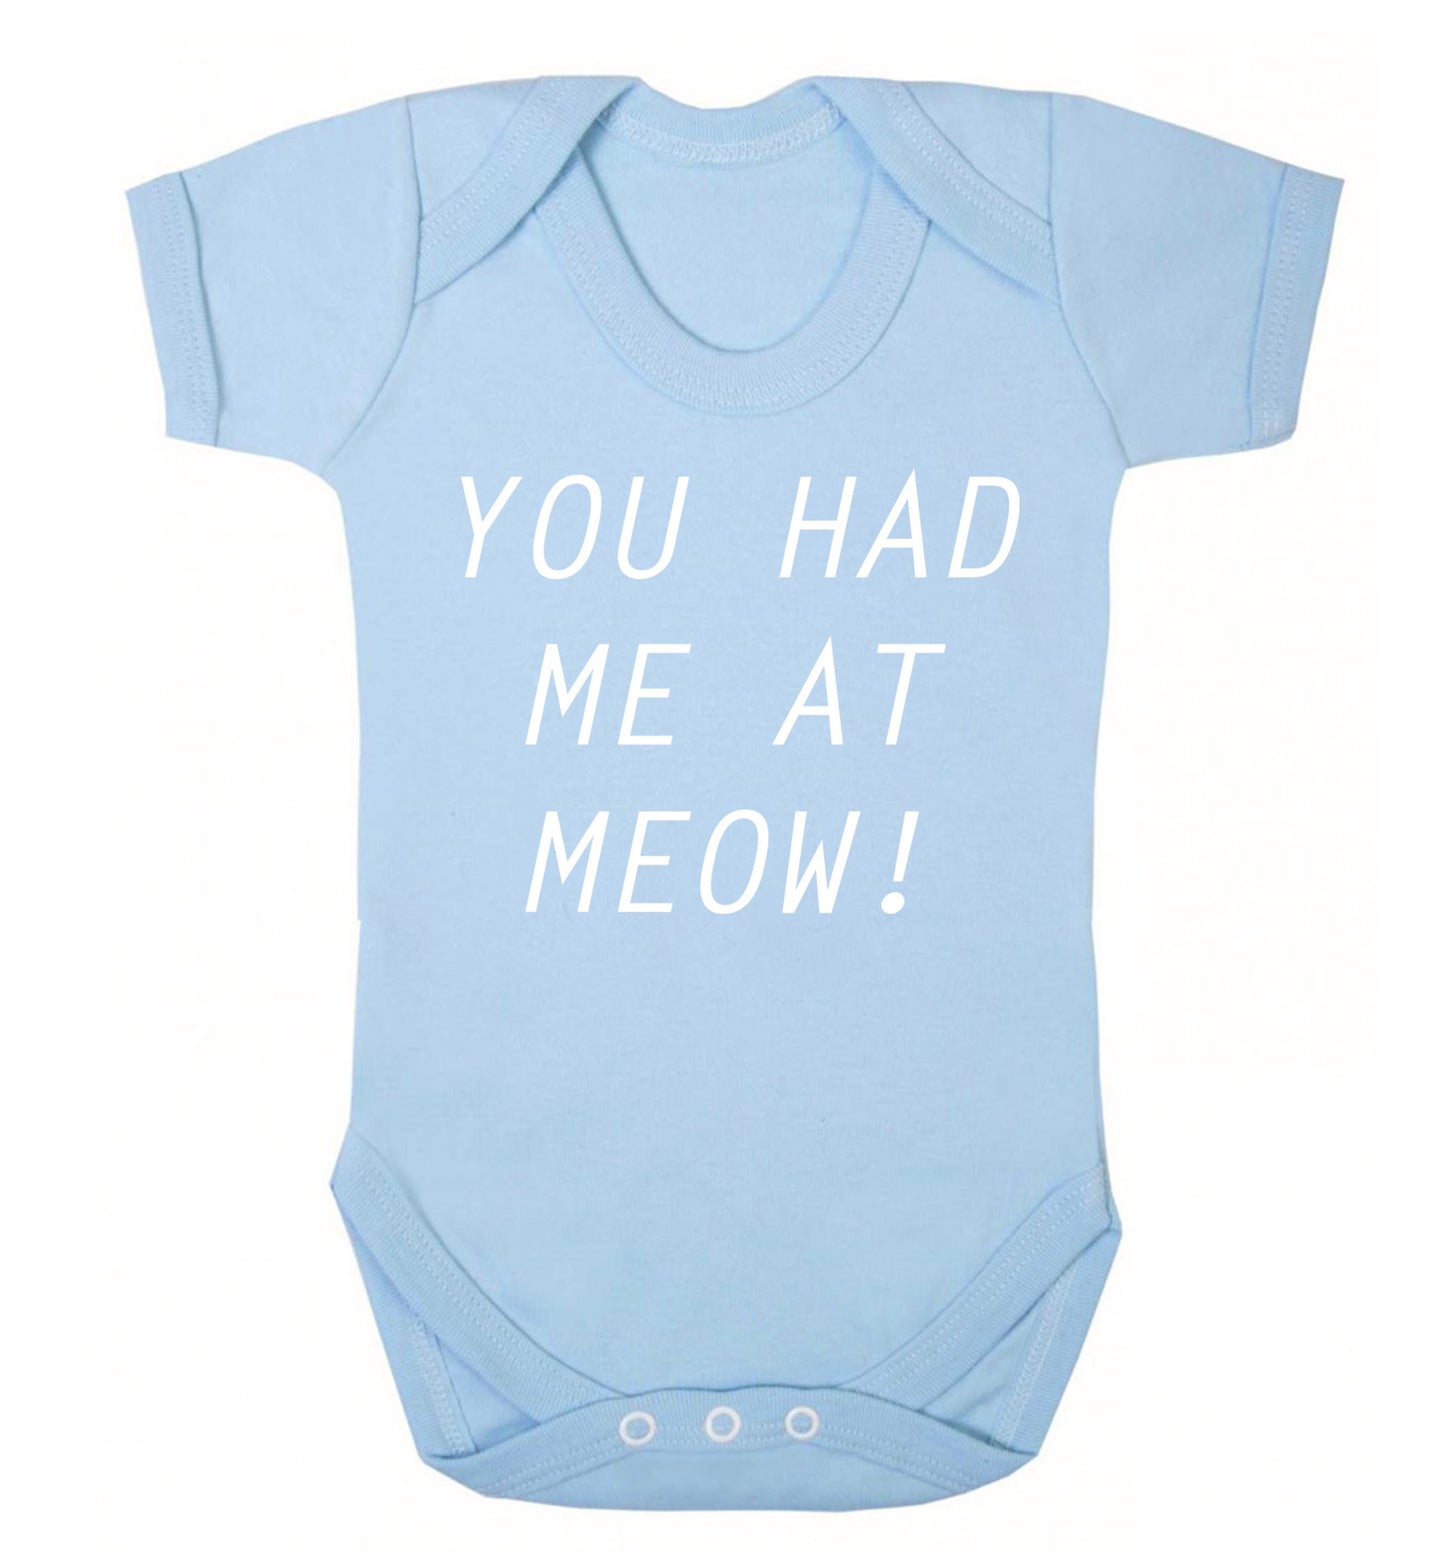 You had me at meow Baby Vest pale blue 18-24 months